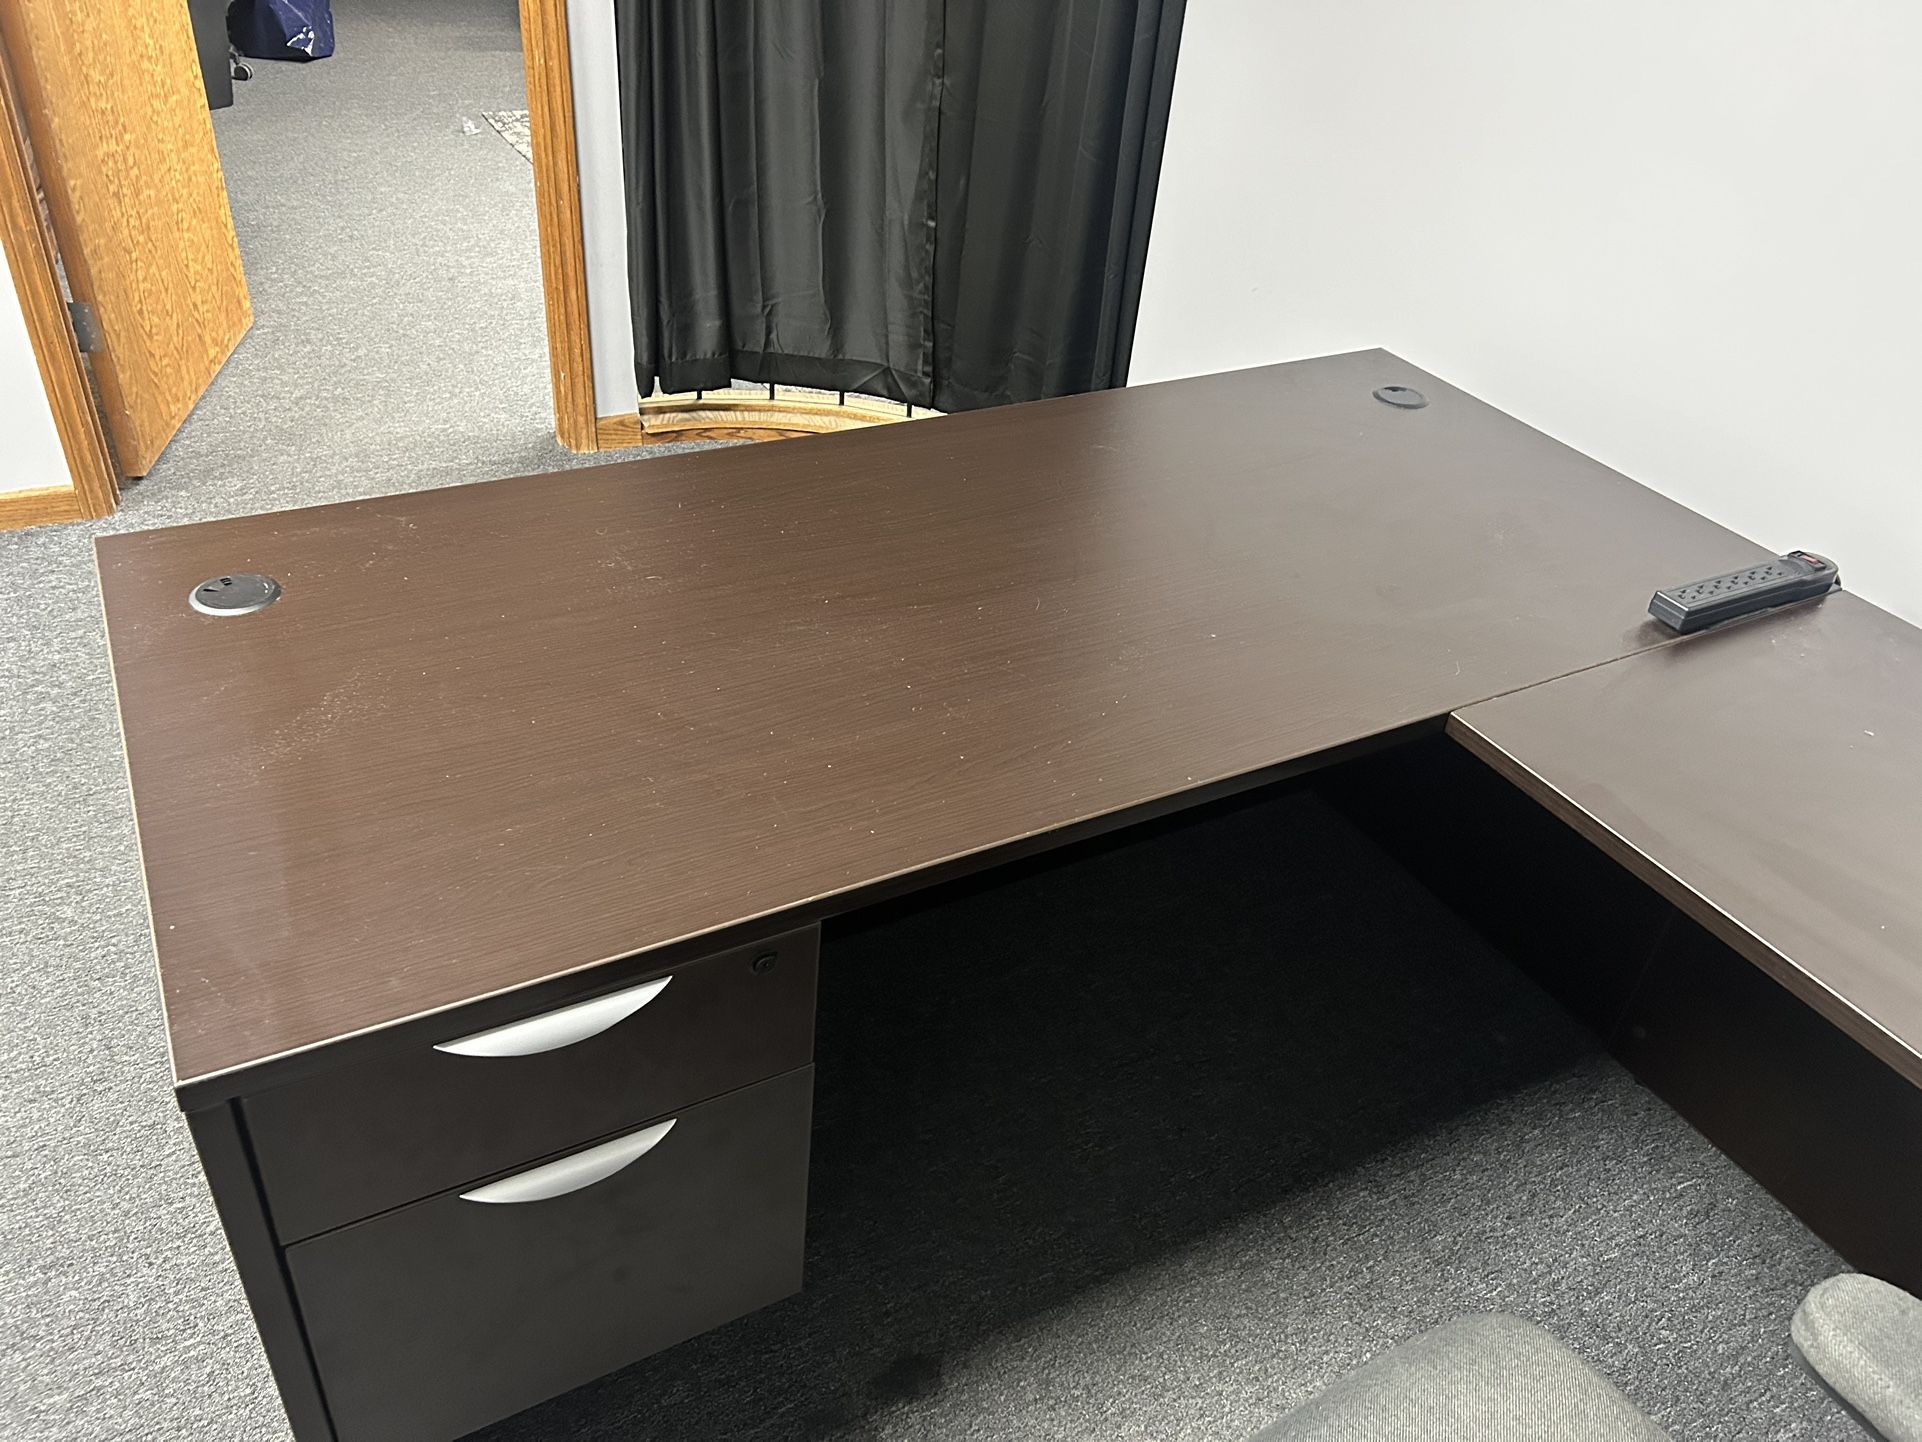 Sectional L Desk With Chair 